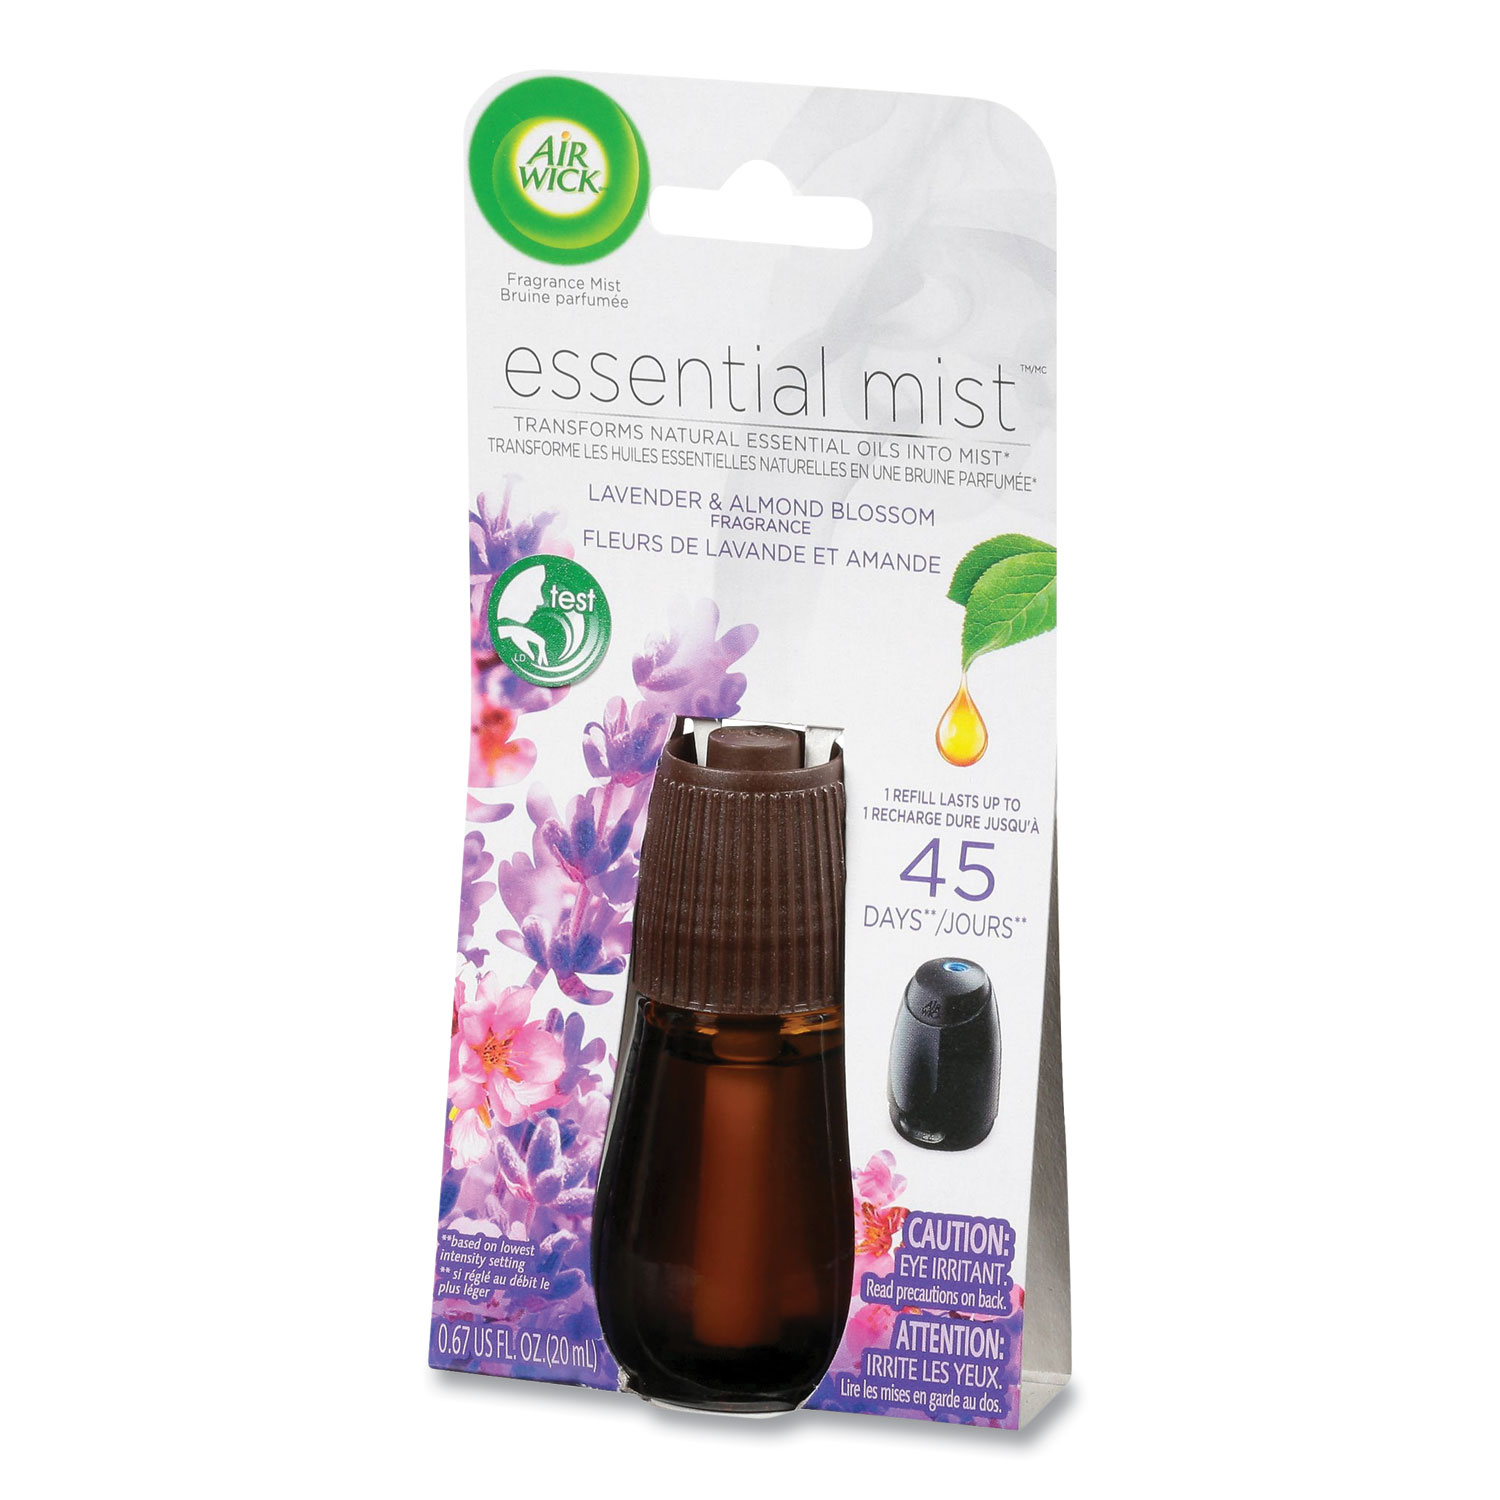 Air Wick Plug in Scented Oil Refill, 3ct, Fresh Waters, Air Freshener,  Essential Oils